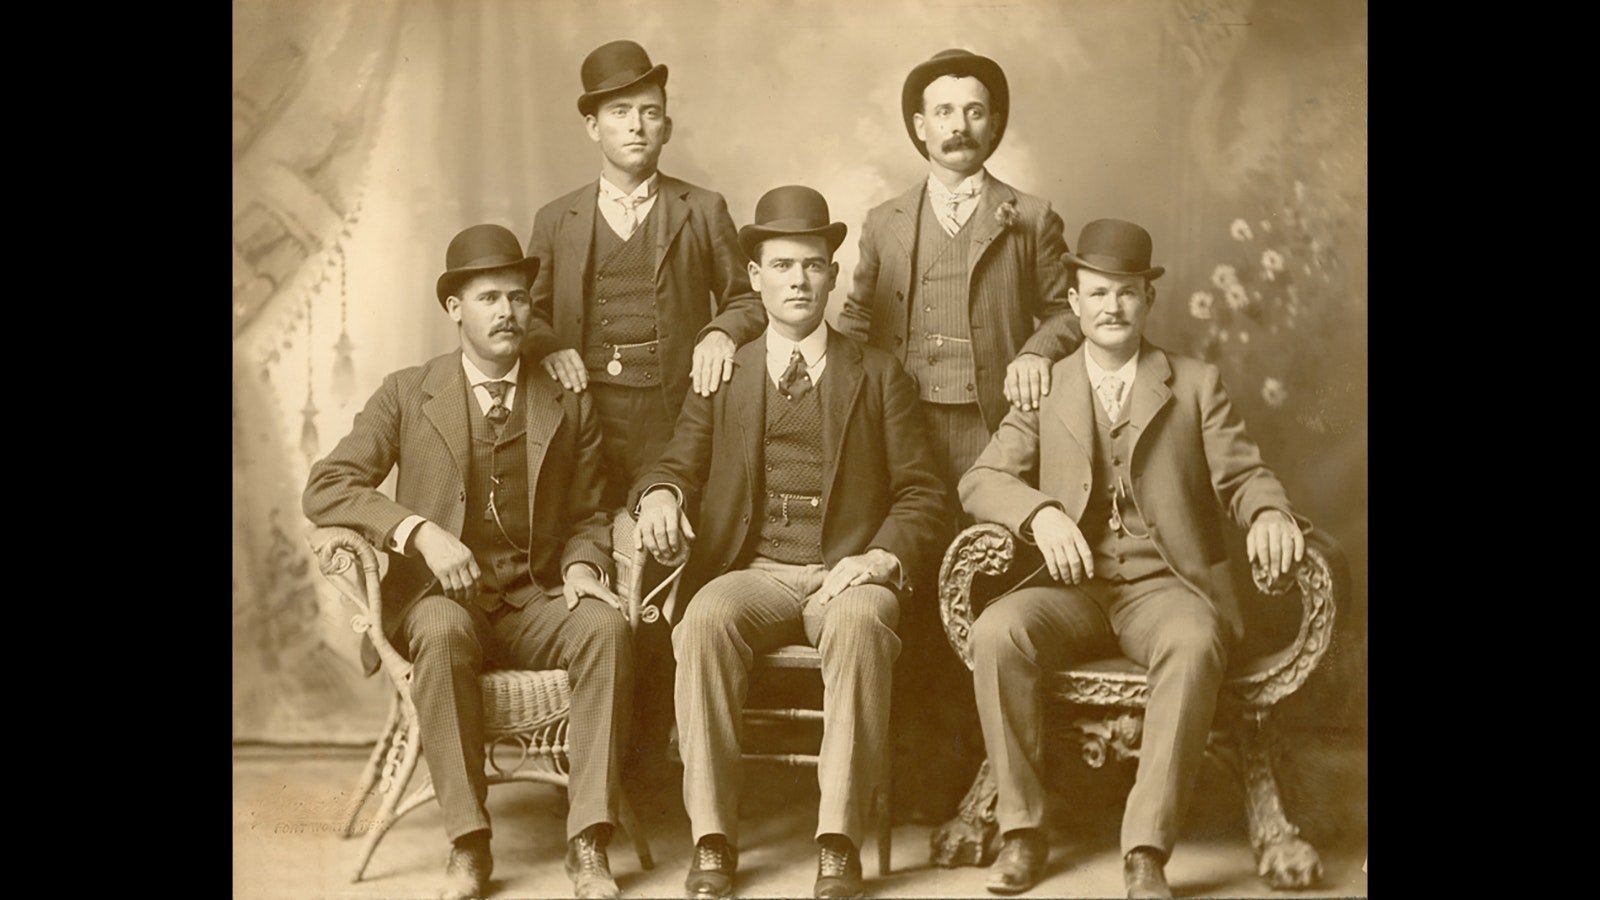 Photo of Butch Cassidy, lower right, and the Wild Bunch outlaws by a Fort Worth, Texas, photographer in